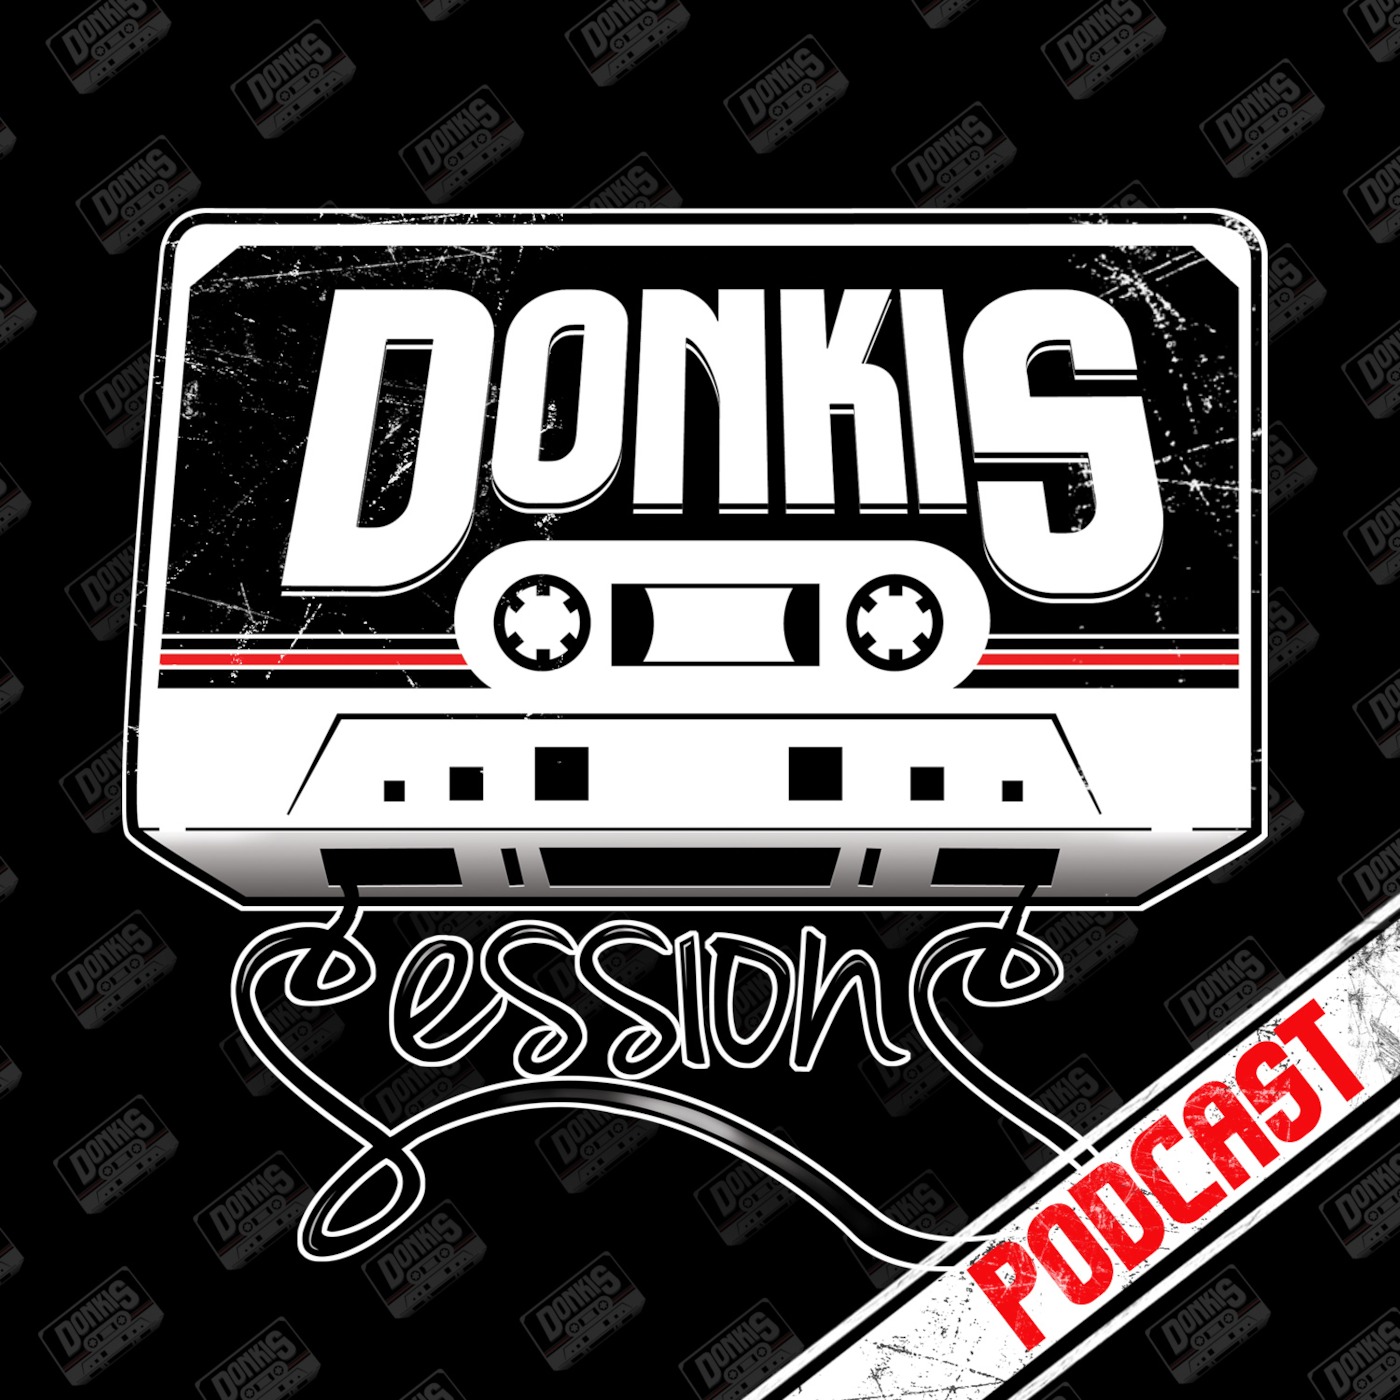 Session Podcast ft Donkis Episode 3 w/ Special Guest The Disco Fries